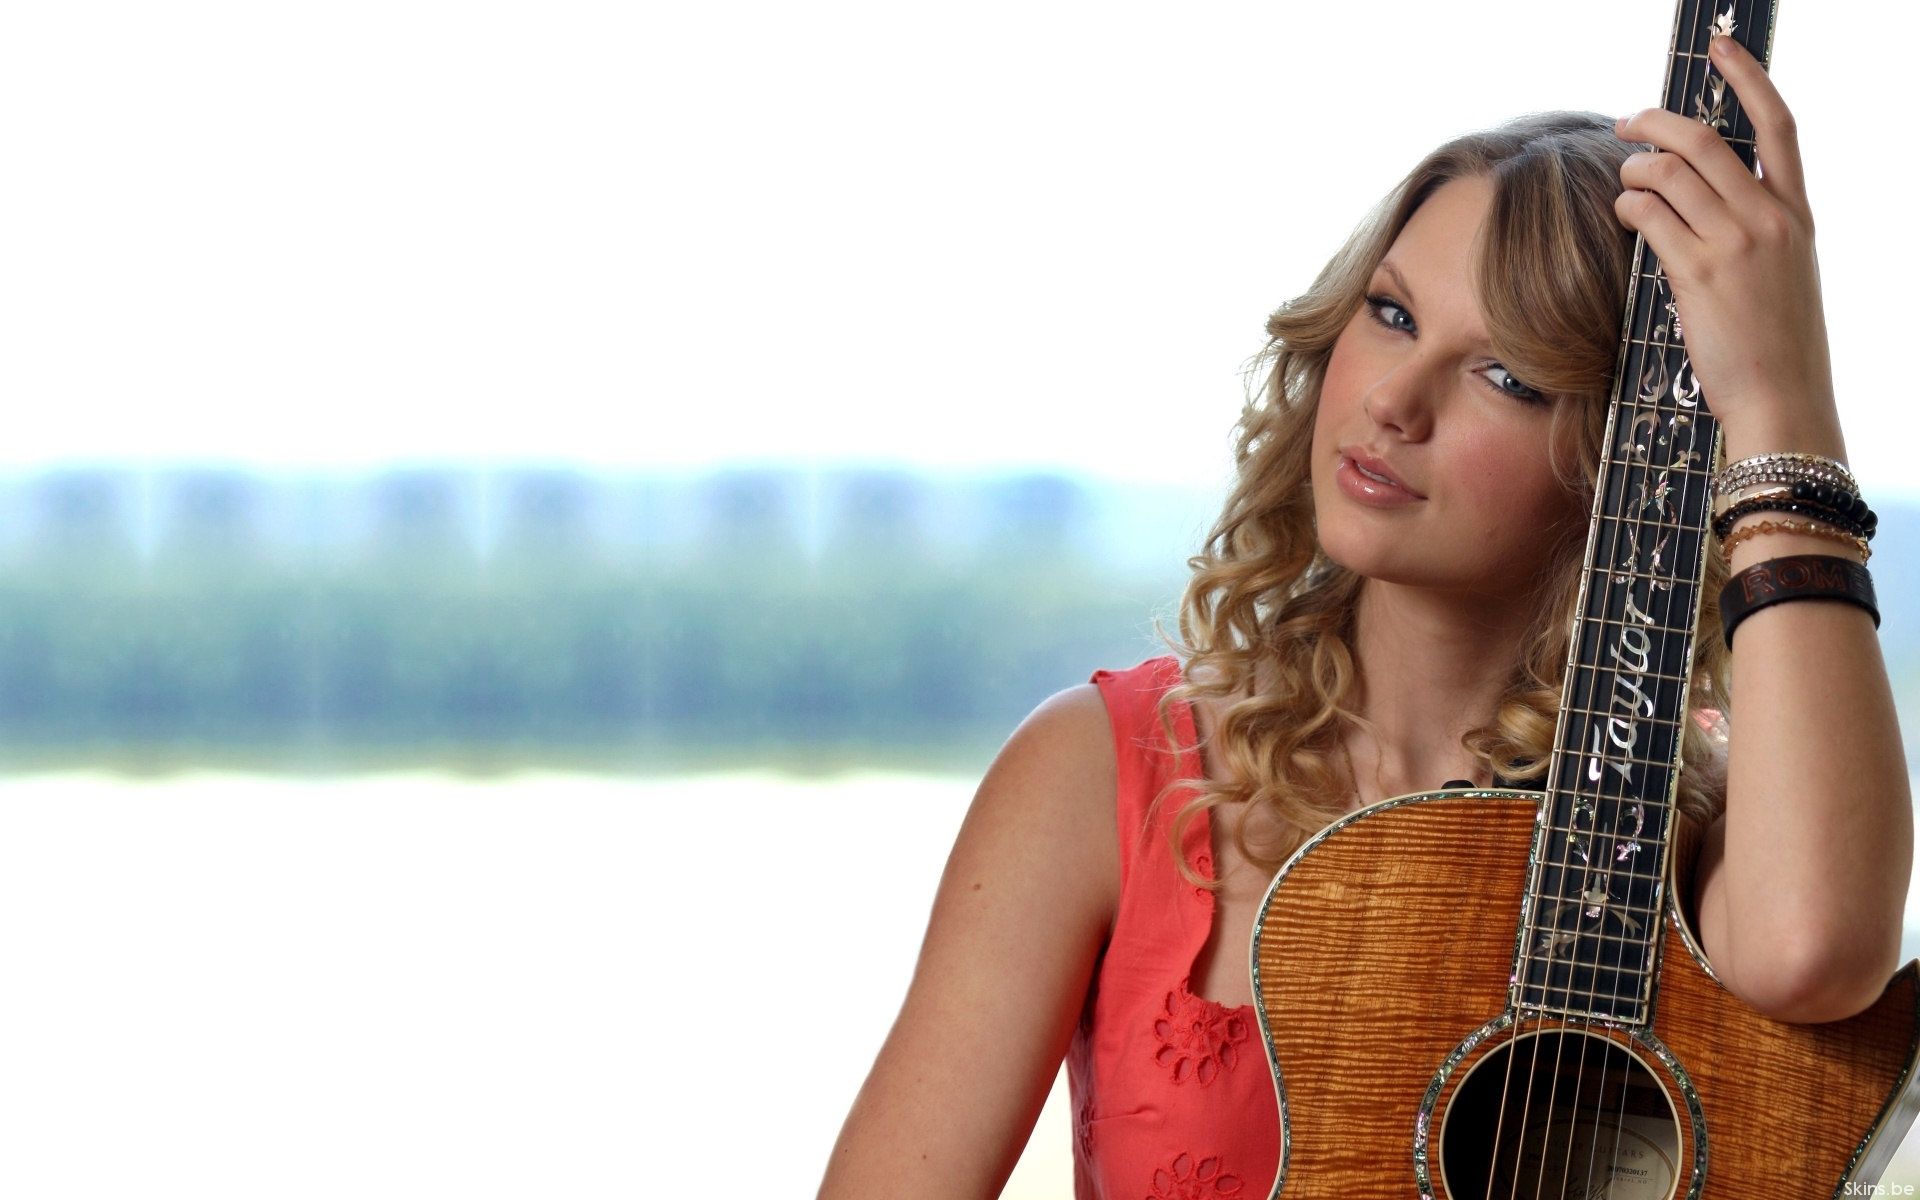 blondes, women, music, Taylor Swift, Country, celebrity, singers wallpaper